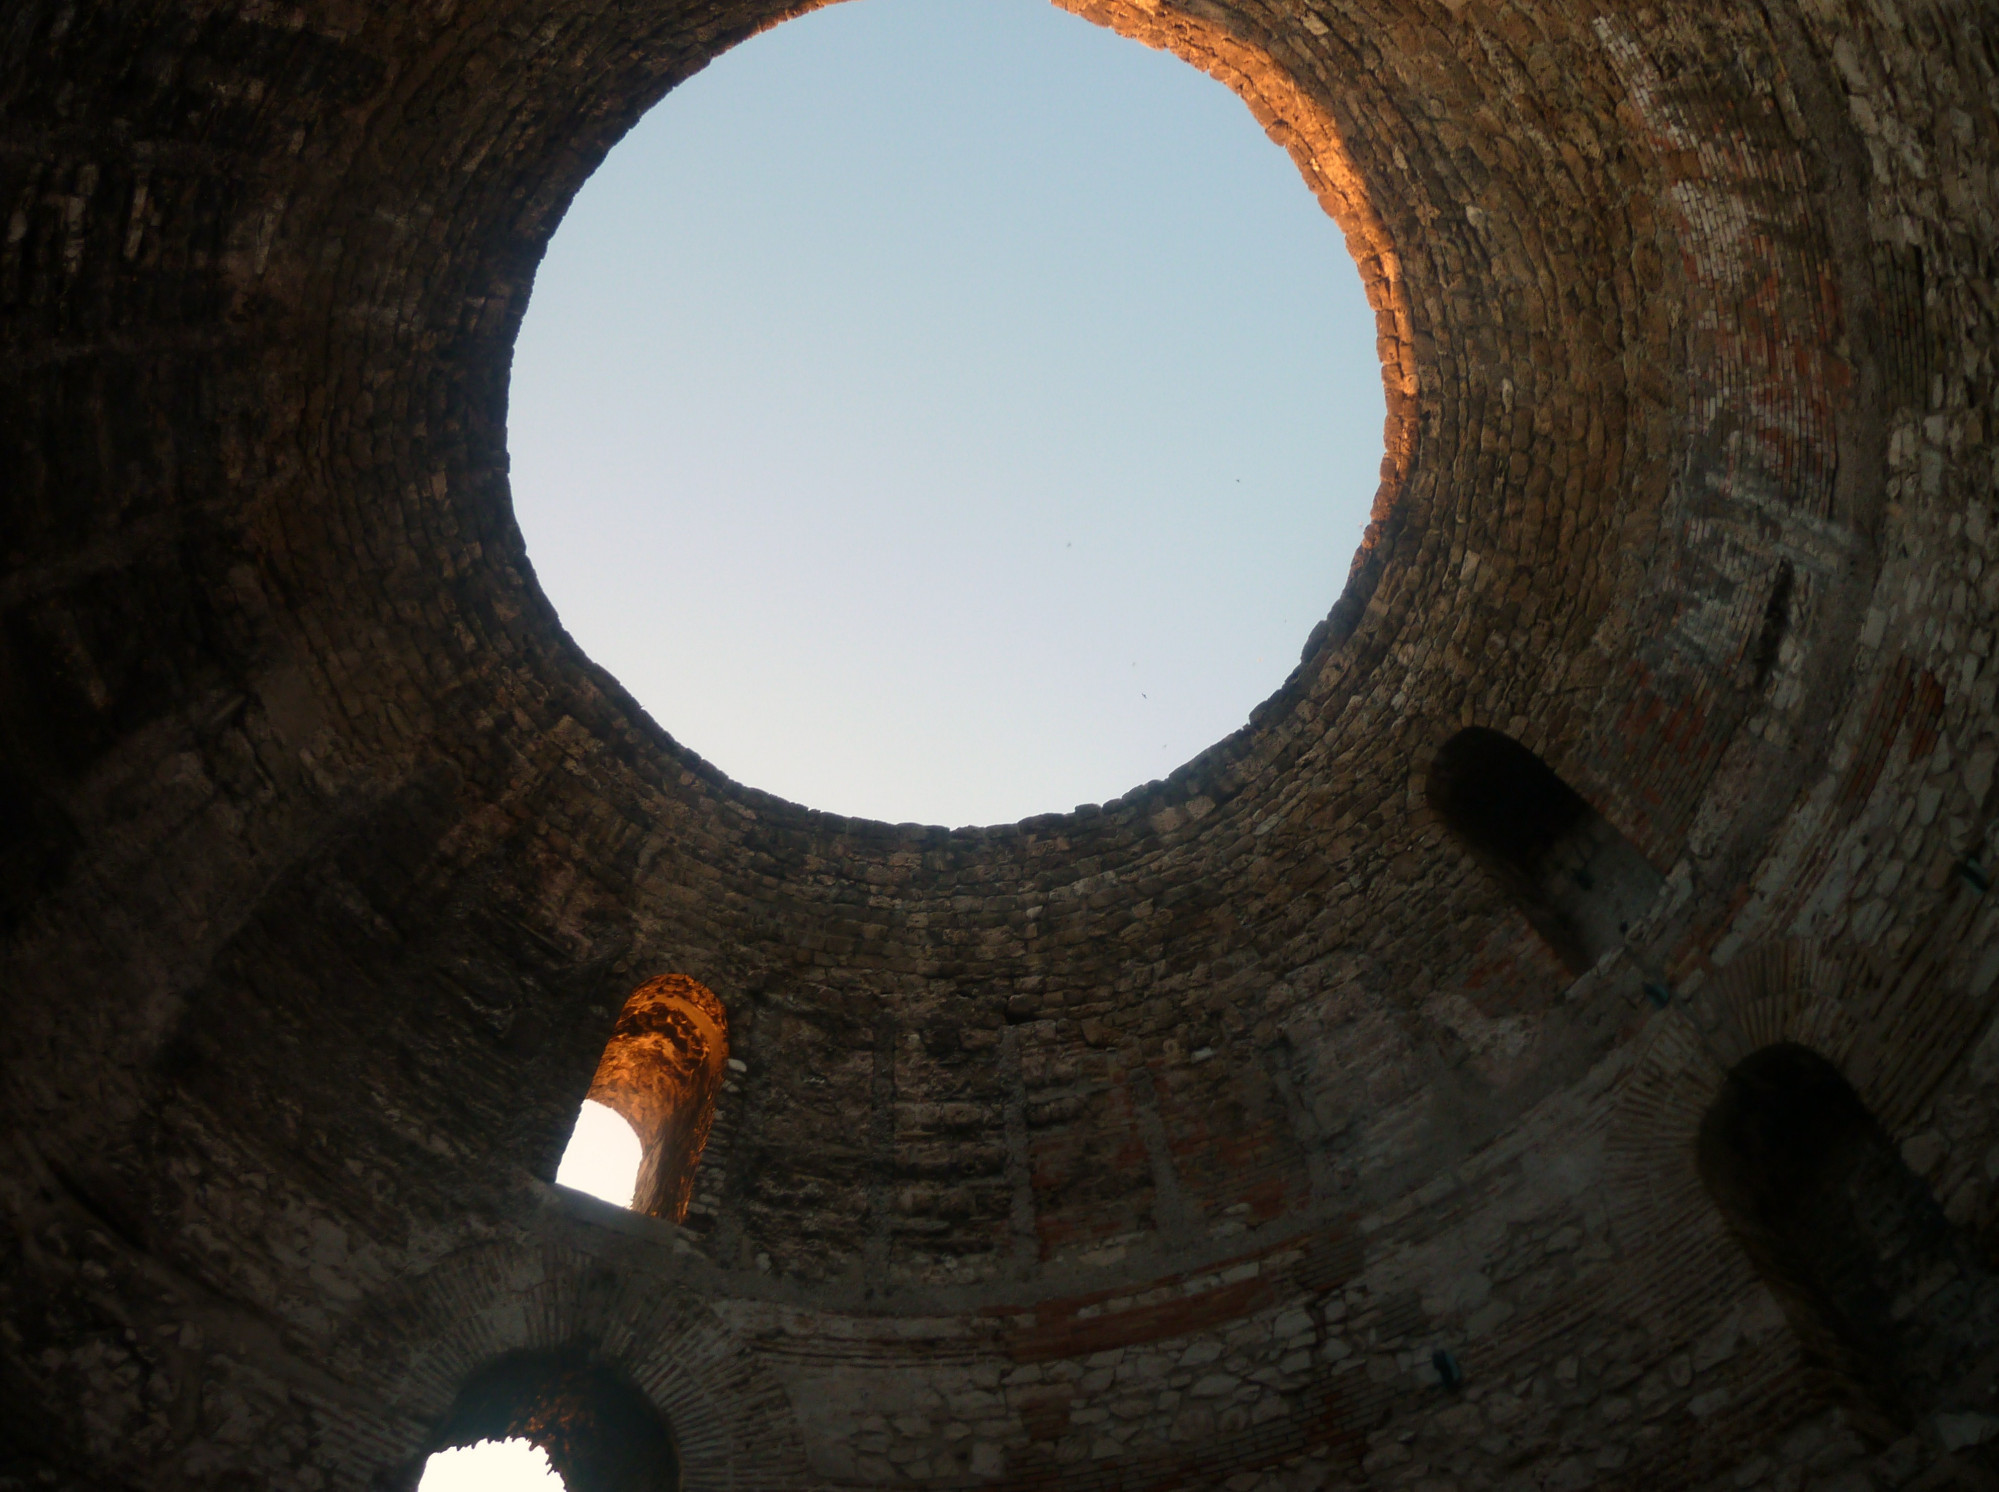 Oculus of Vestibule of Diocletian's Palace